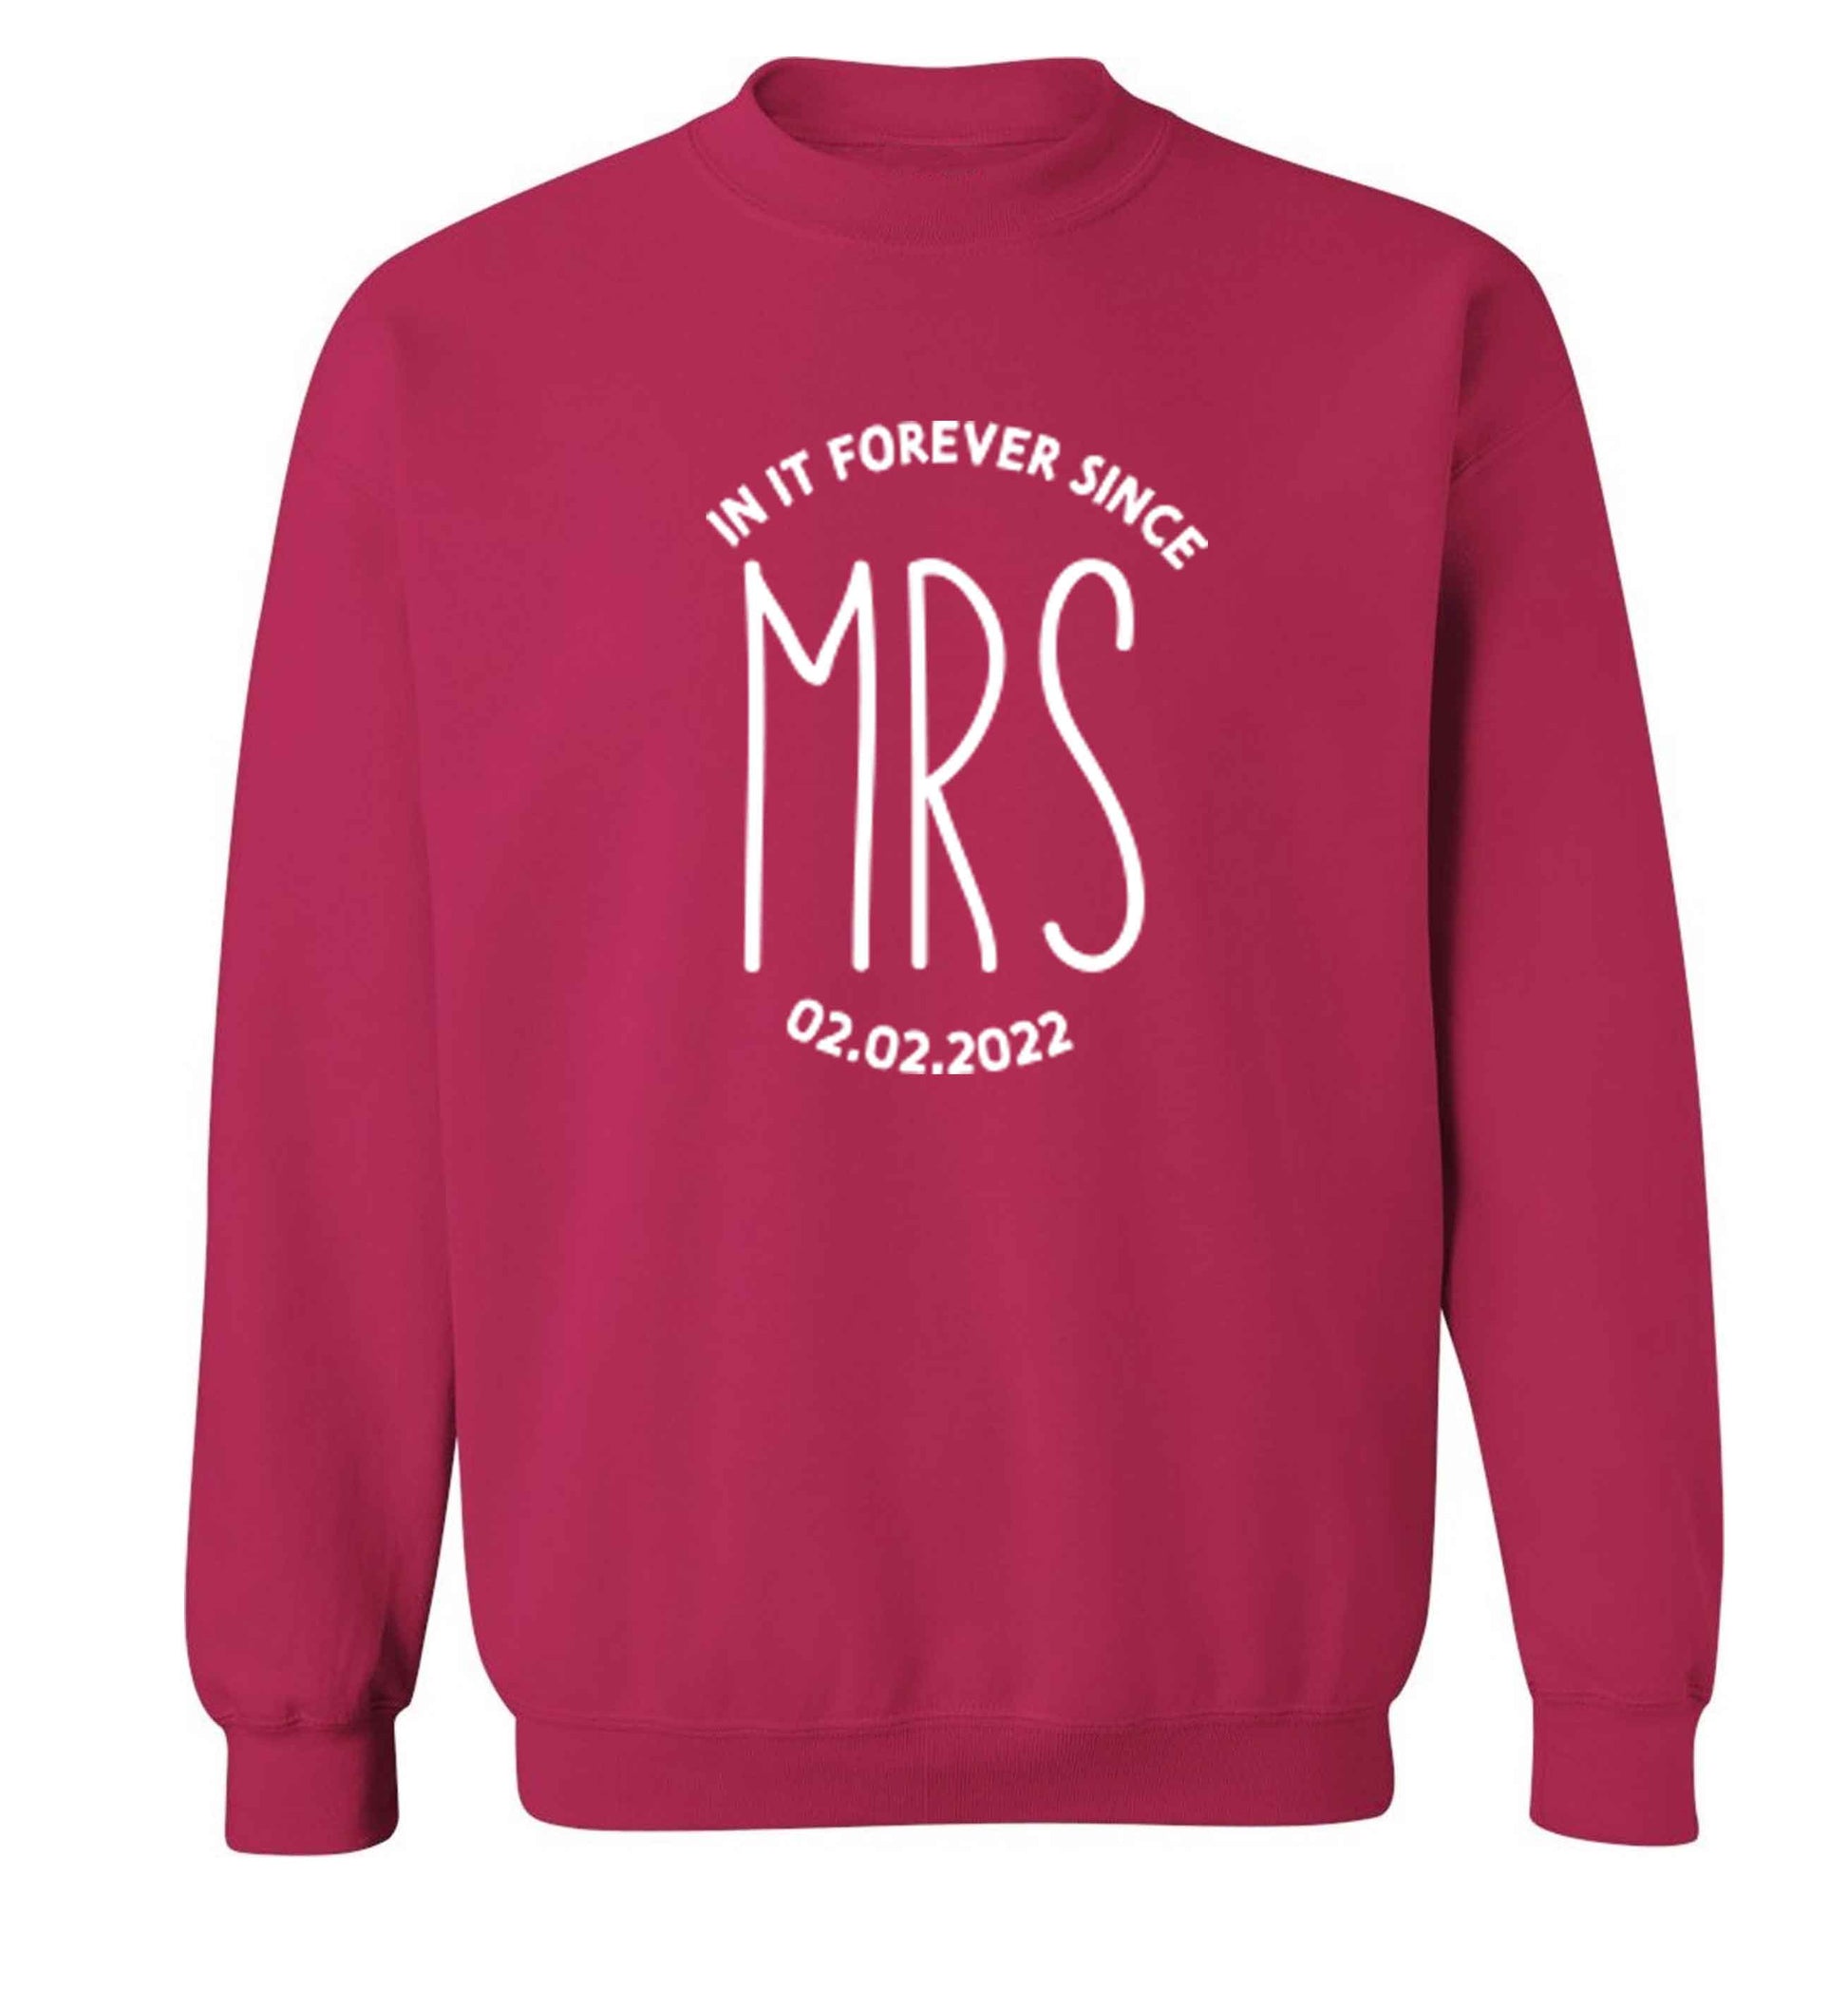 Funny matching gifts for him and her! Get matchy matchy, ideal for newlywed couples or a little valentines gift! adult's unisex pink sweater 2XL